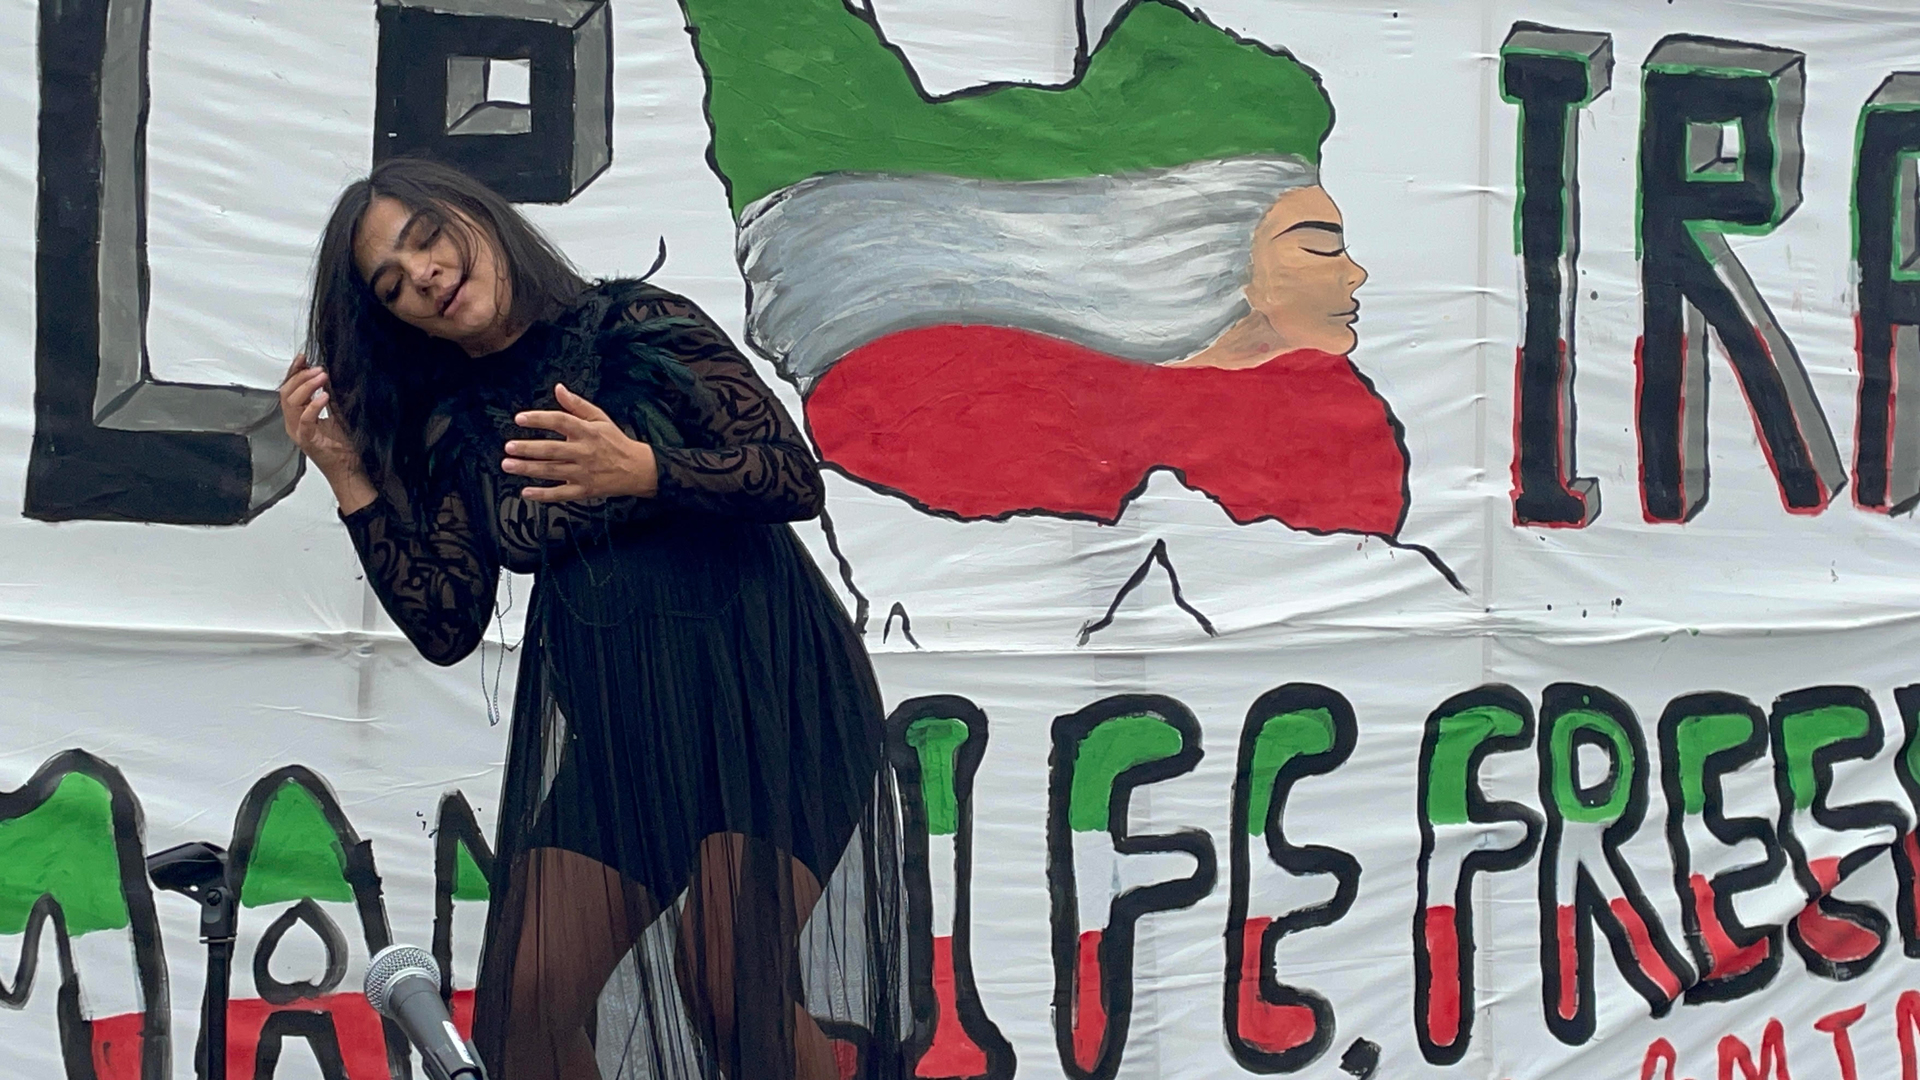 Visibly pregnant woman in black dress dances in front of mural depicting Iranian flag and protest messages